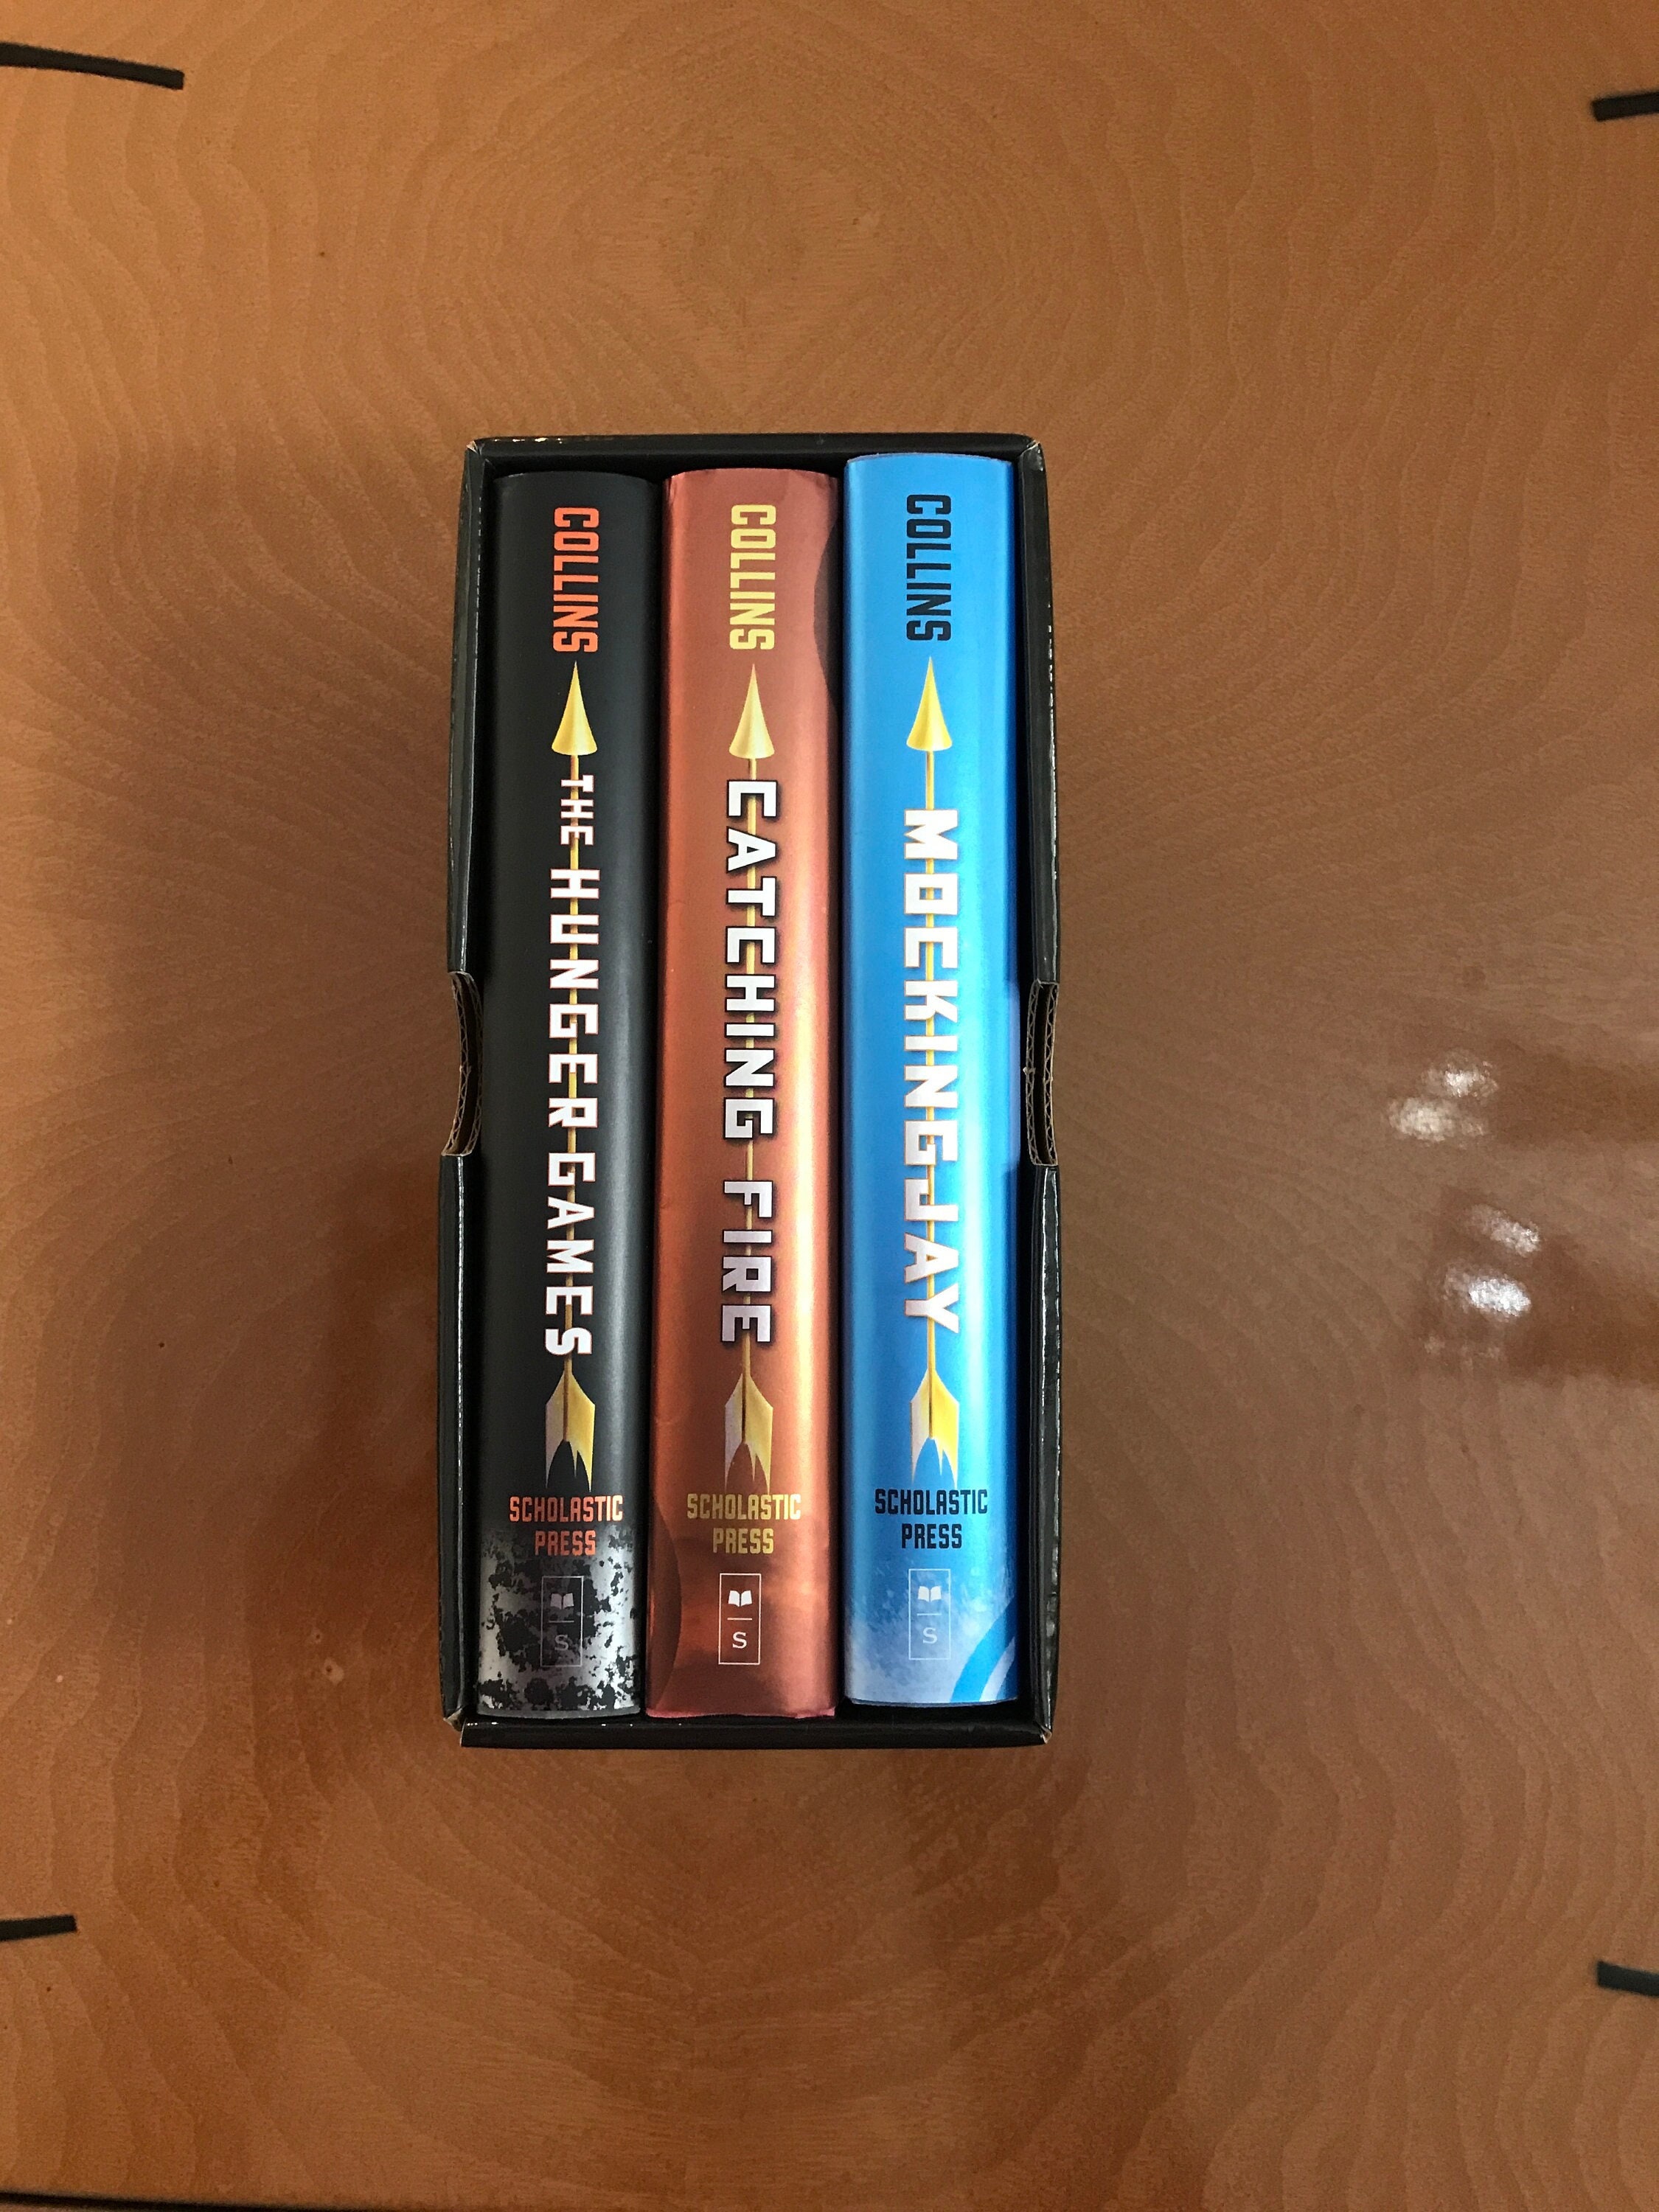 The Hunger Games Set Mixed Book Lot - Scholastic Press - Books 1-3-  Complete Set